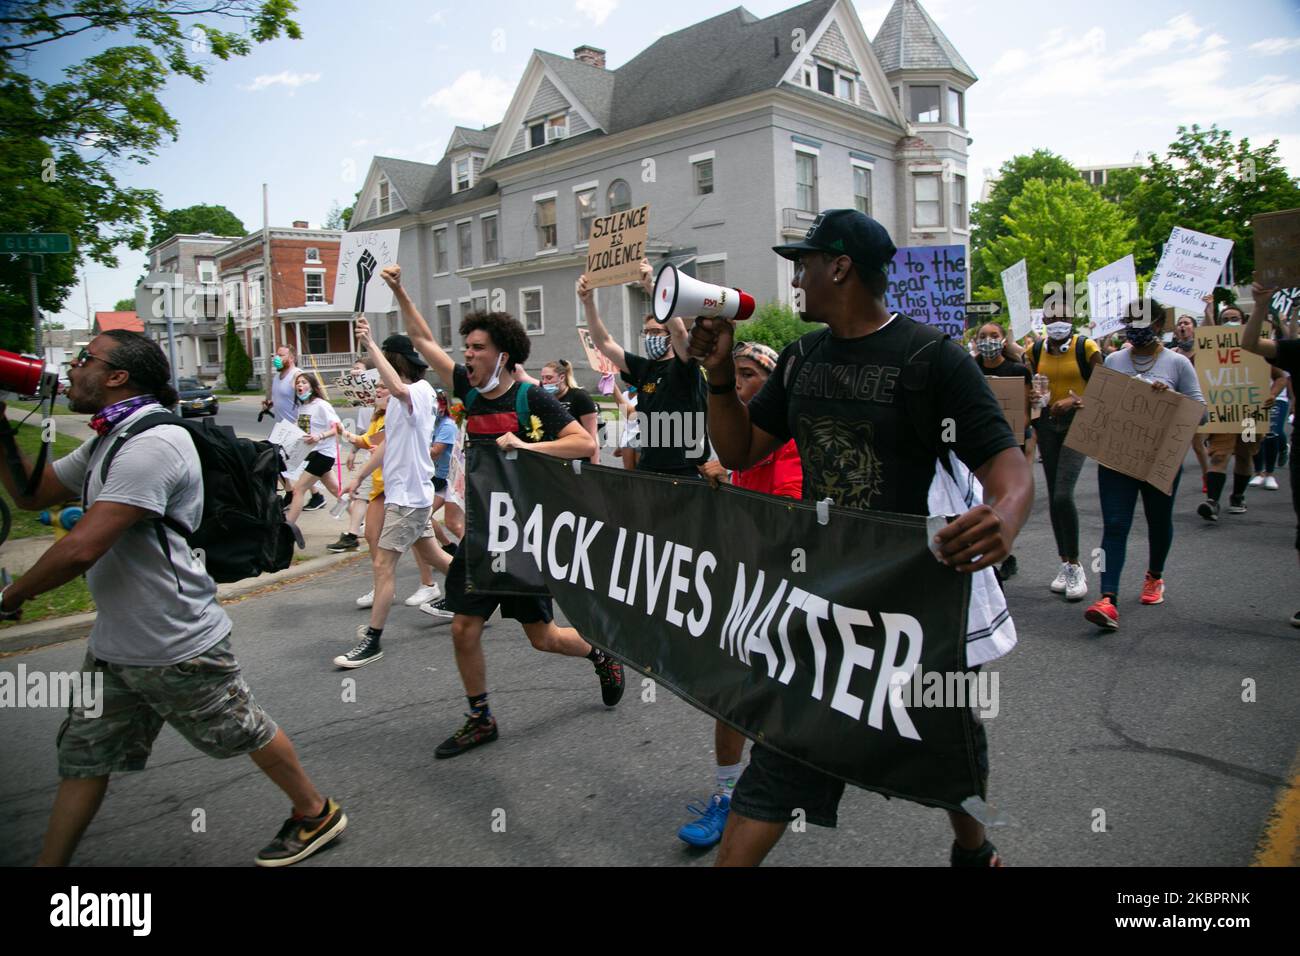 People during a Black Lives Matter march in the rural, mostly white community of Glens Falls, New York on Friday, June 5, 2020. The rally started at the Crandall Public Library at 1 p.m. and continued on to Crandall Park. (Photo by Karla Ann Cote/NurPhoto) Stock Photo